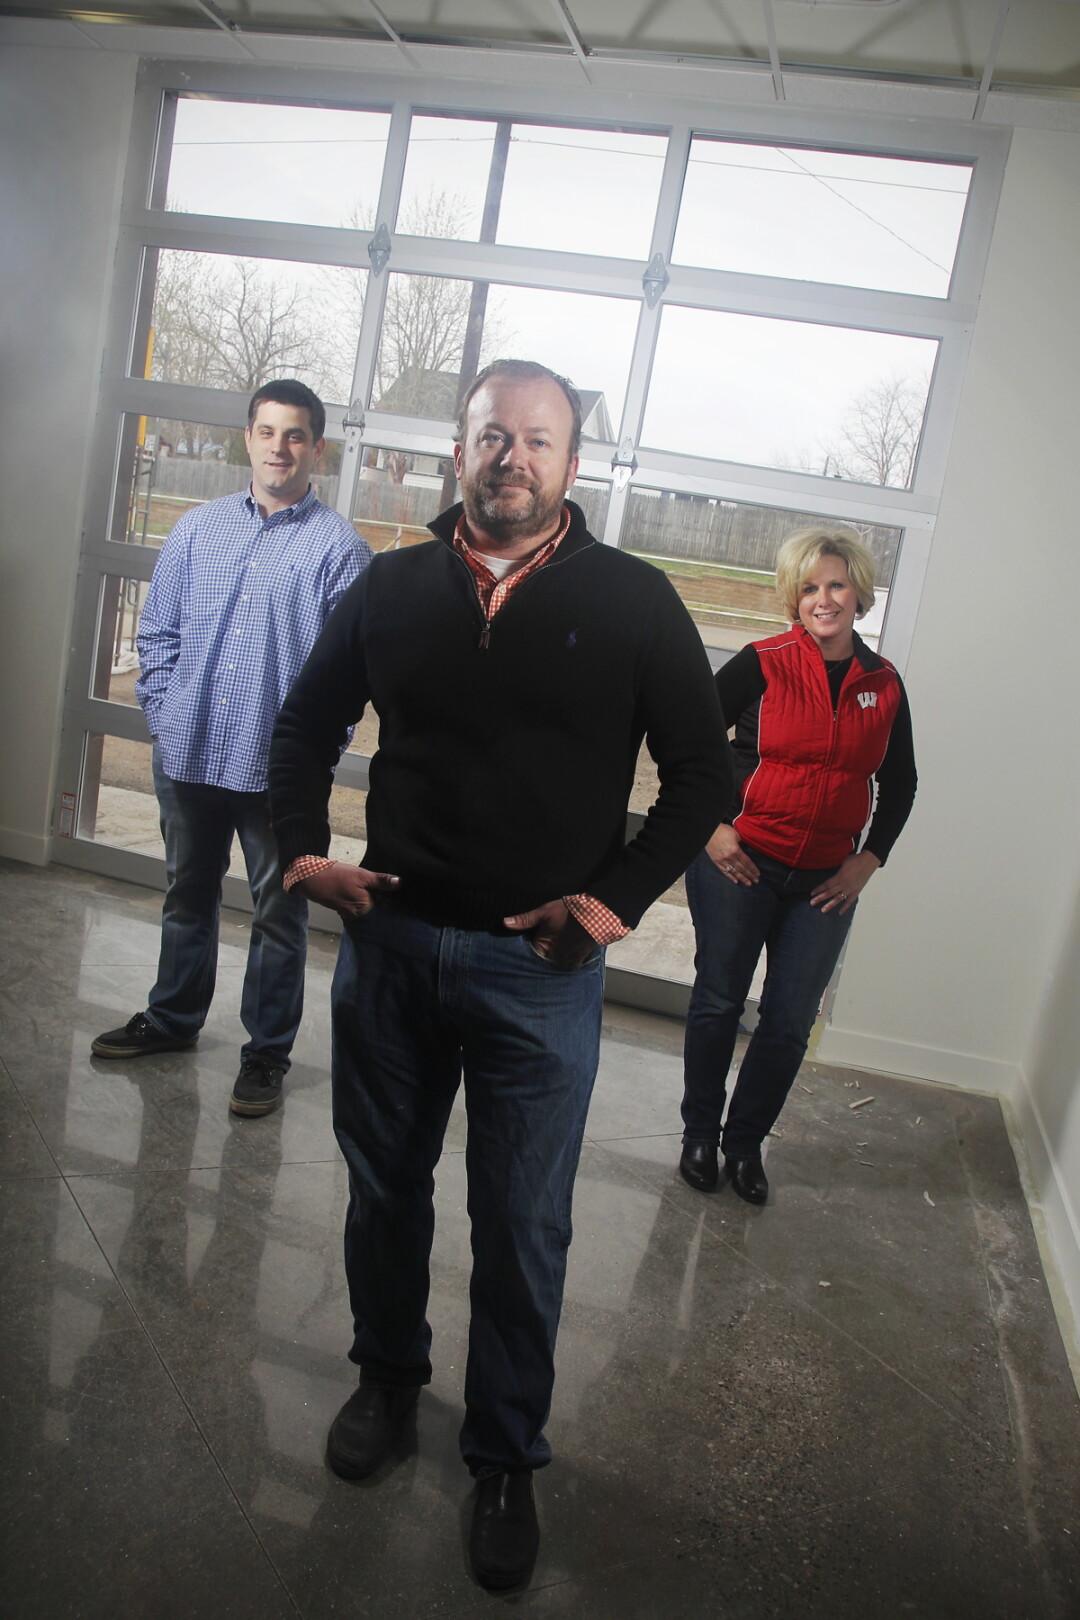 A DOORWAY TO FLAVOR. The team behind The Classic Garage is, from left to right, Alex Karrer (co-owner/general manager), Rick Payton (co-owner), and Kristi Kimble (operations manager).